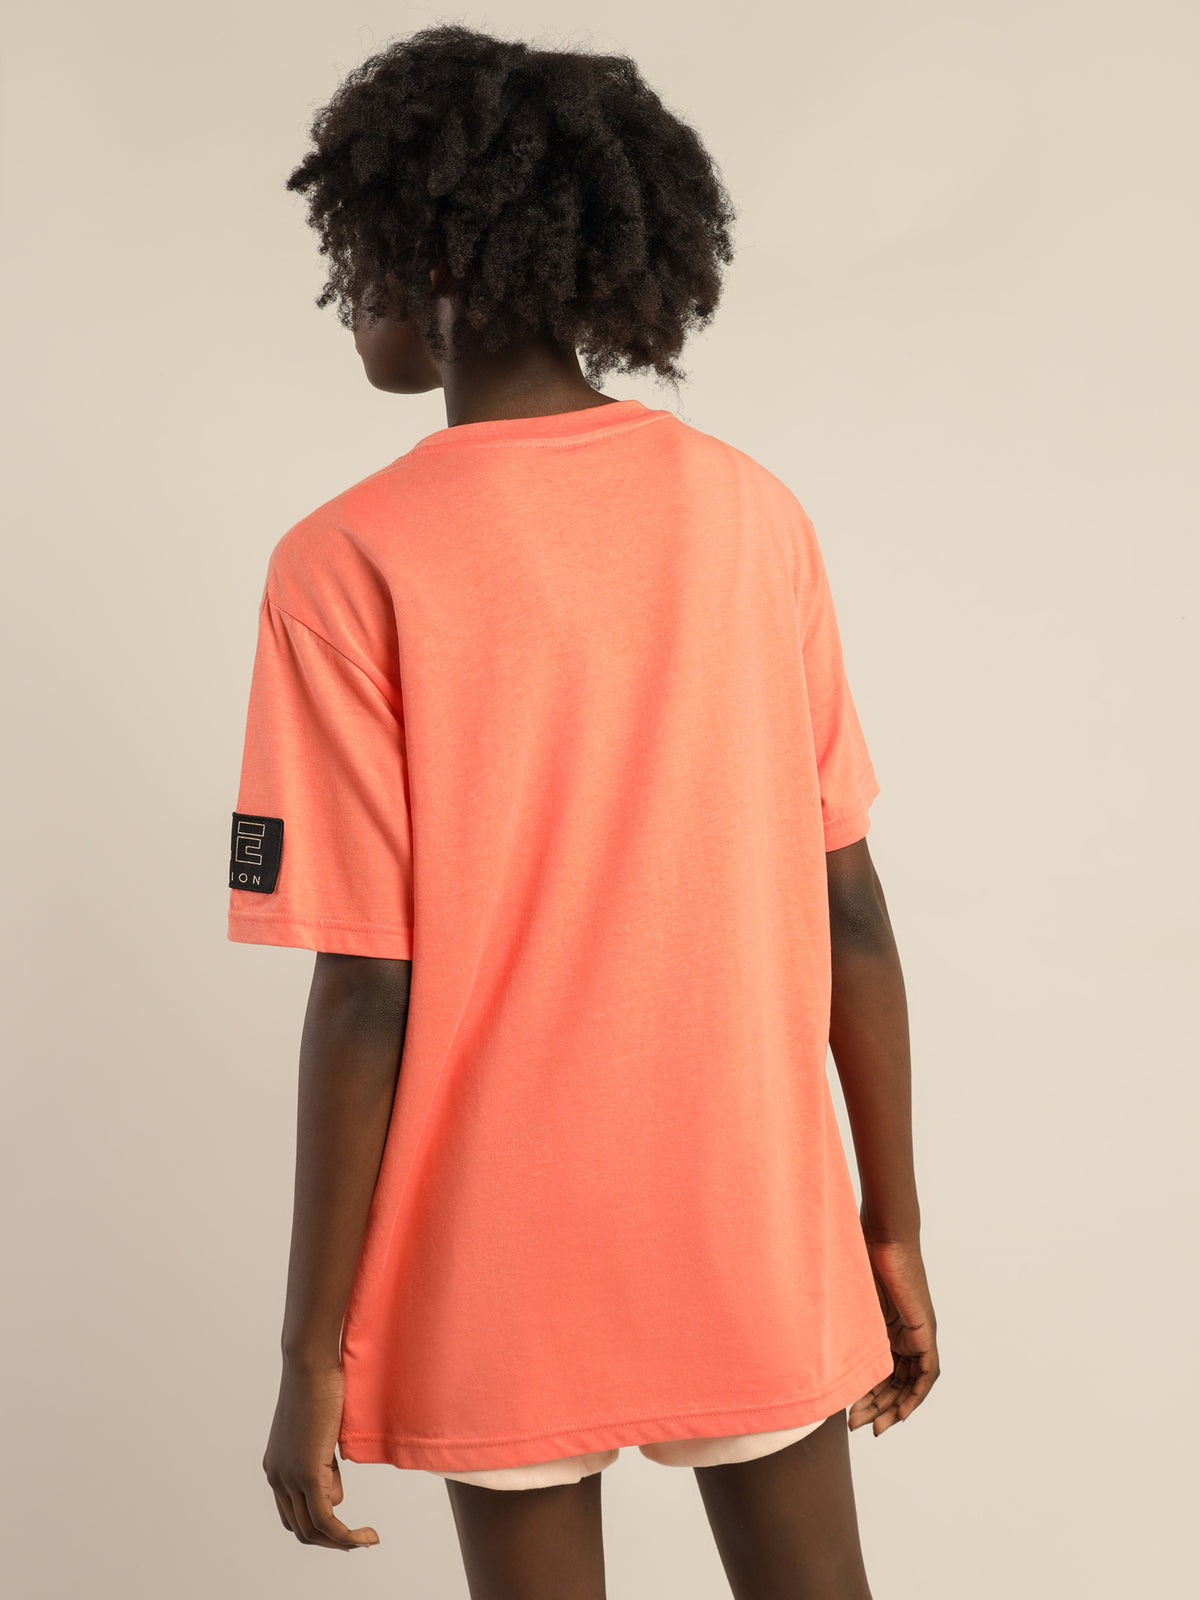 Dimension T-Shirt in Camellia Coral Pink